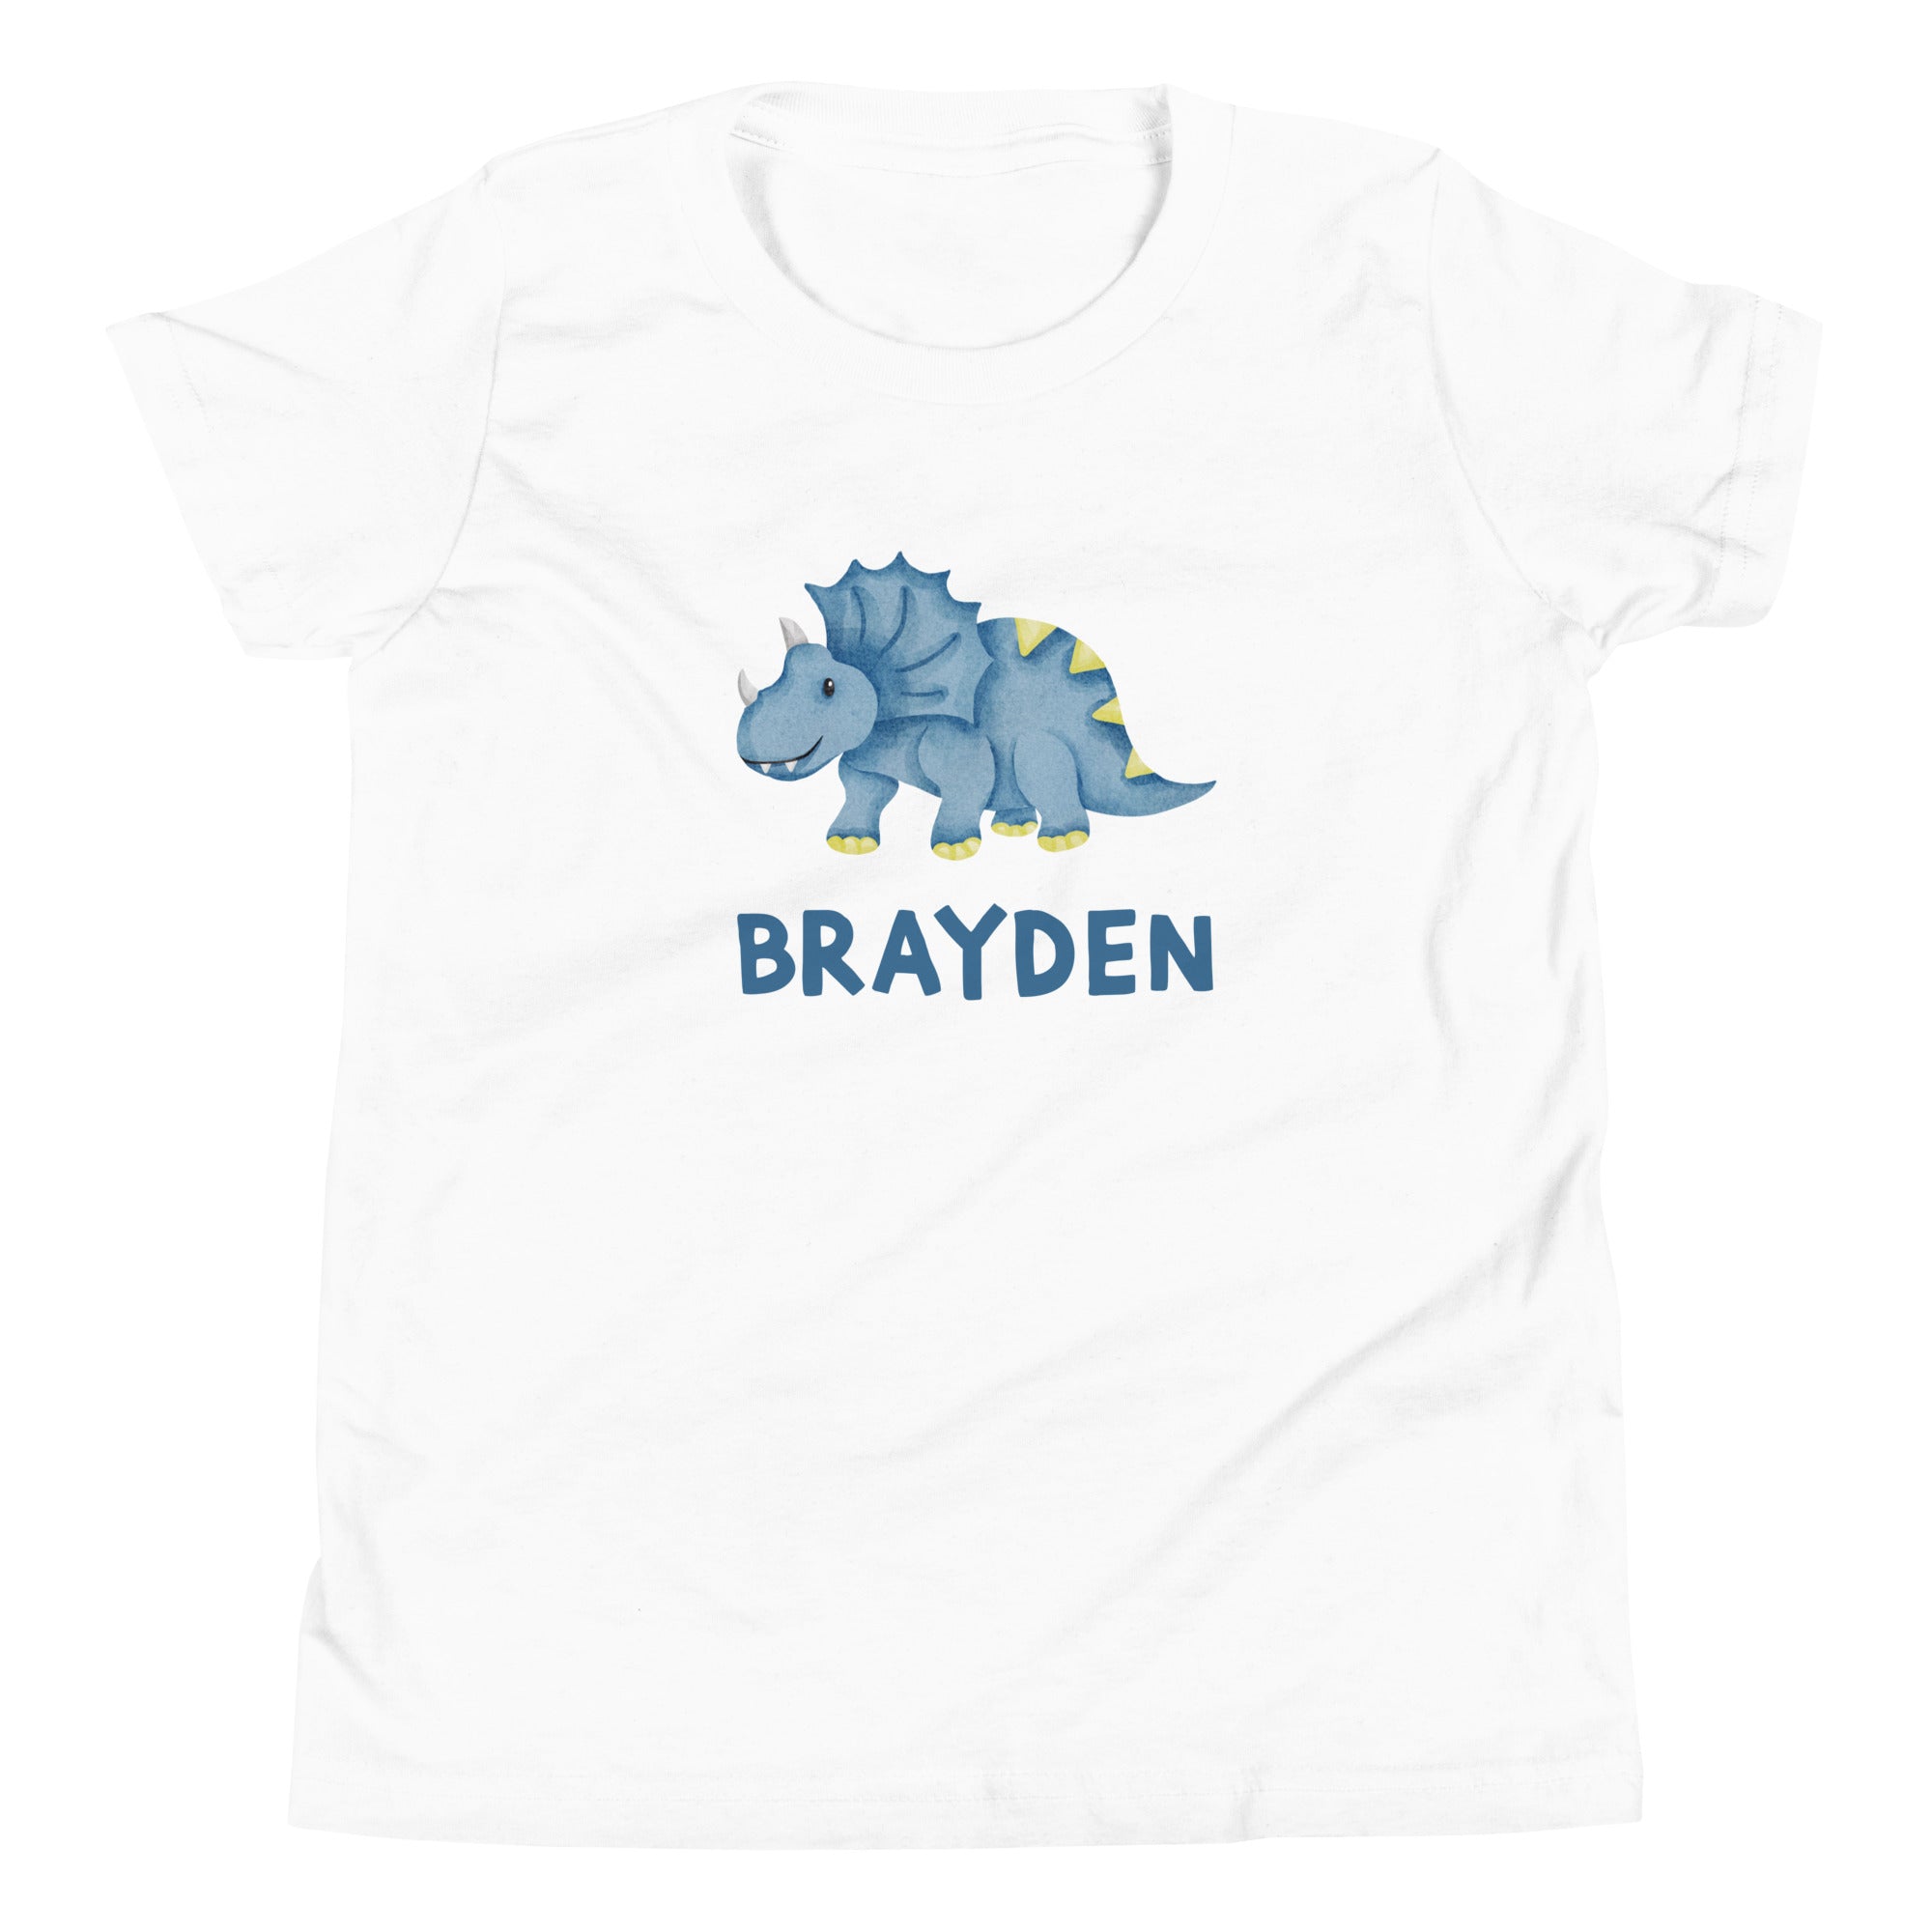 Kids personalize white tshirt with blue dinosaur